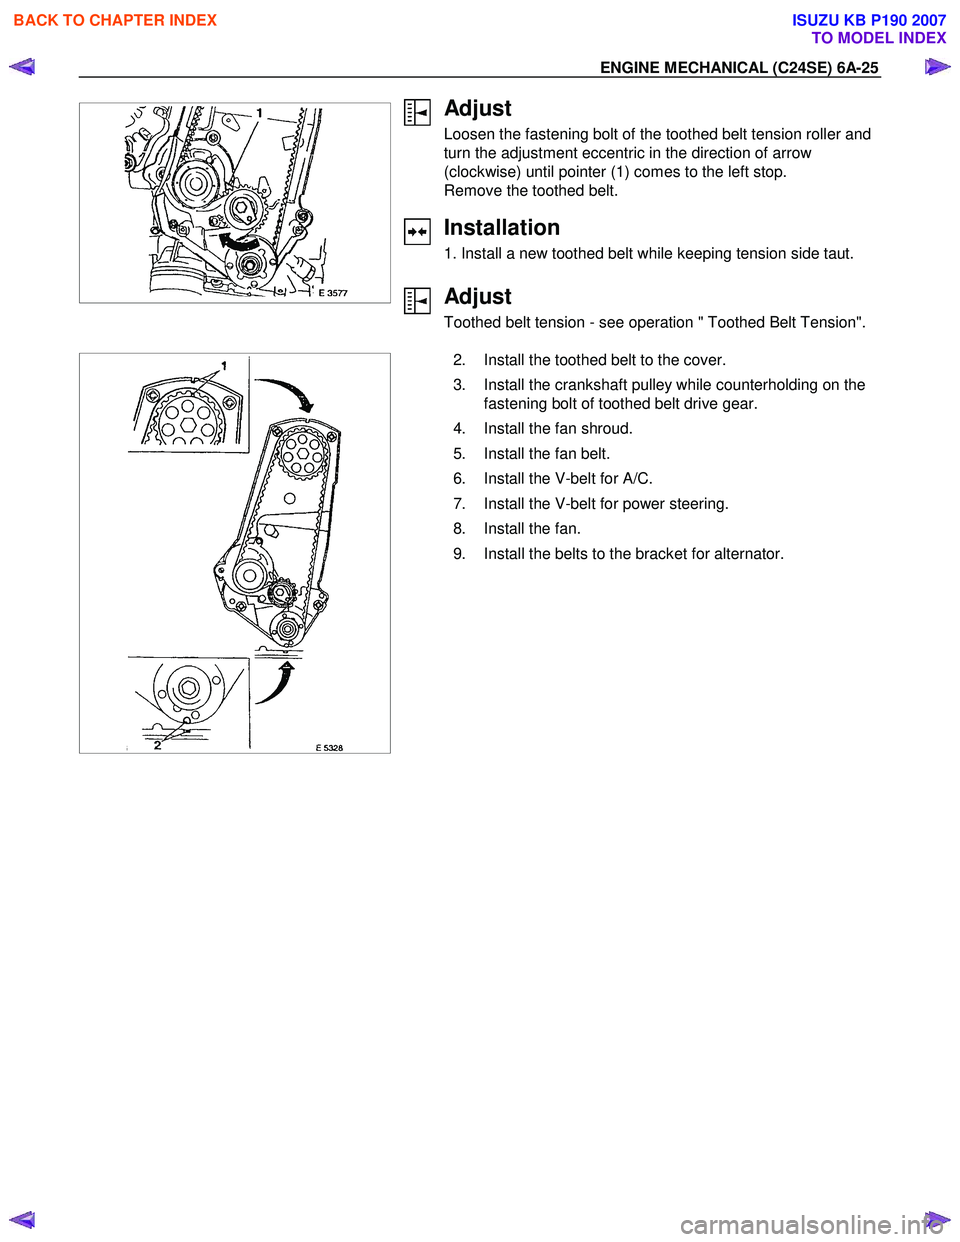 ISUZU KB P190 2007  Workshop Repair Manual ENGINE MECHANICAL (C24SE) 6A-25 
 
 
 
  
 
 
 
 
 
Adjust 
Loosen the fastening bolt of the toothed belt tension roller and 
turn the adjustment eccentric in the direction of arrow 
(clockwise) until